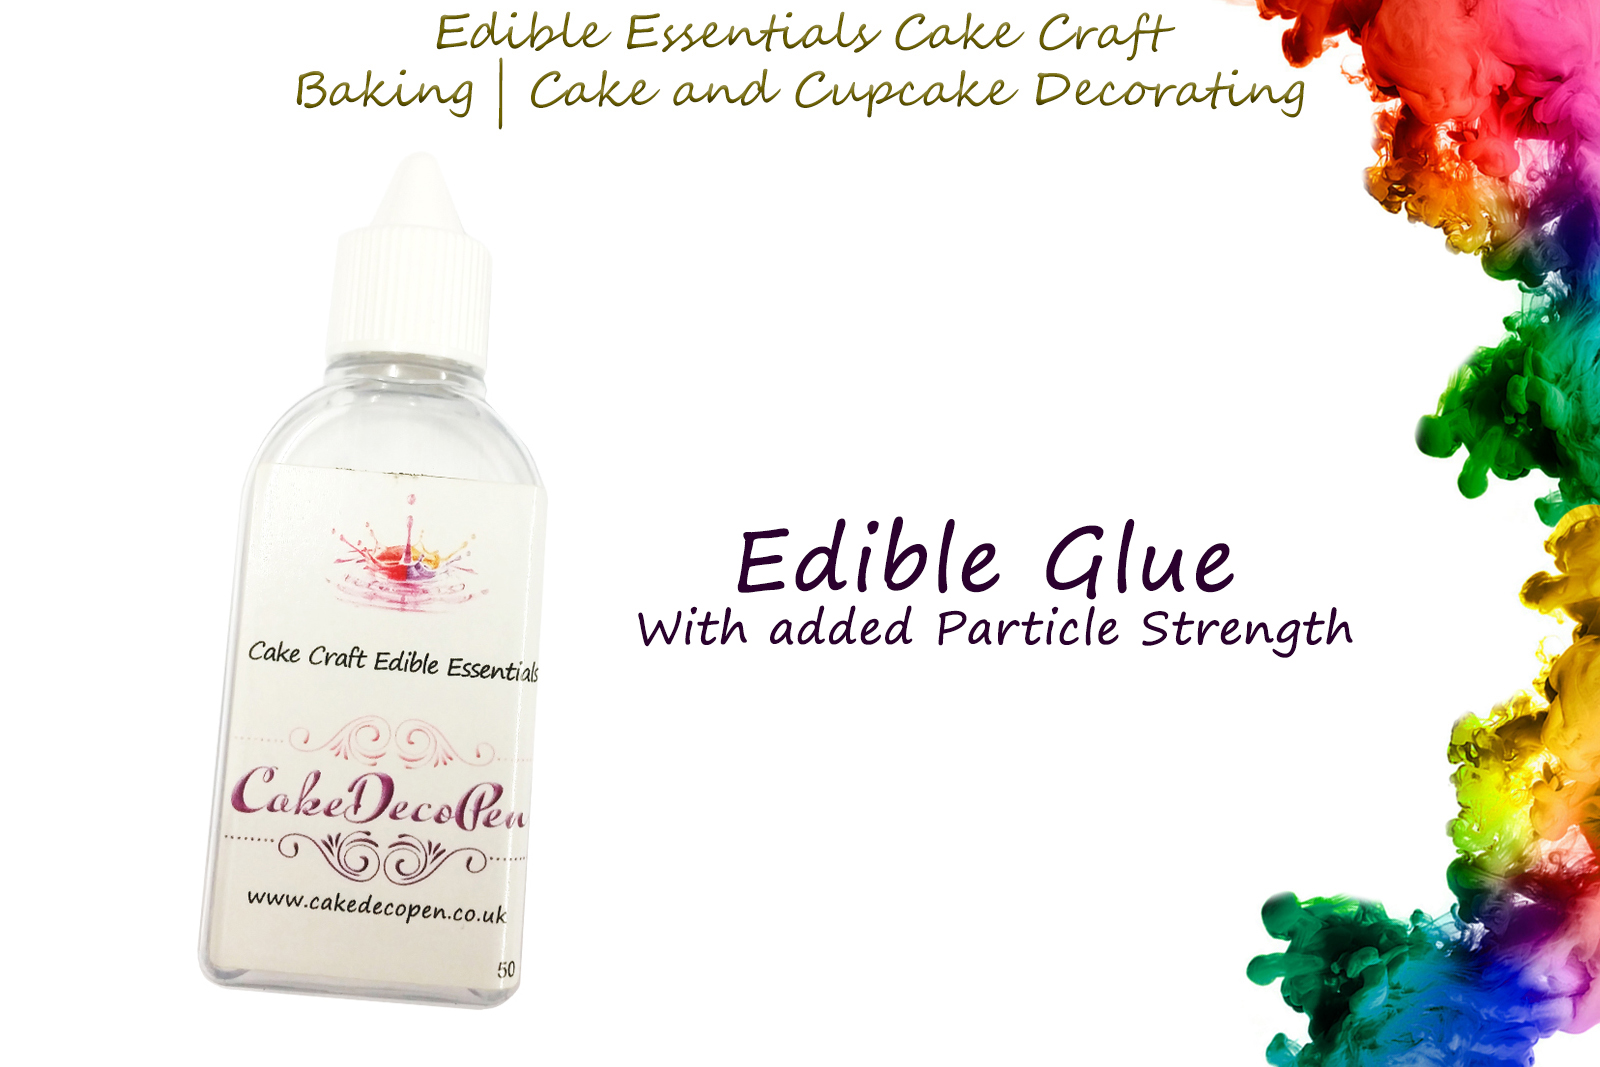 Edible Glue | 50 grams | Edible Essentials Baking and Cake Decorating Craft